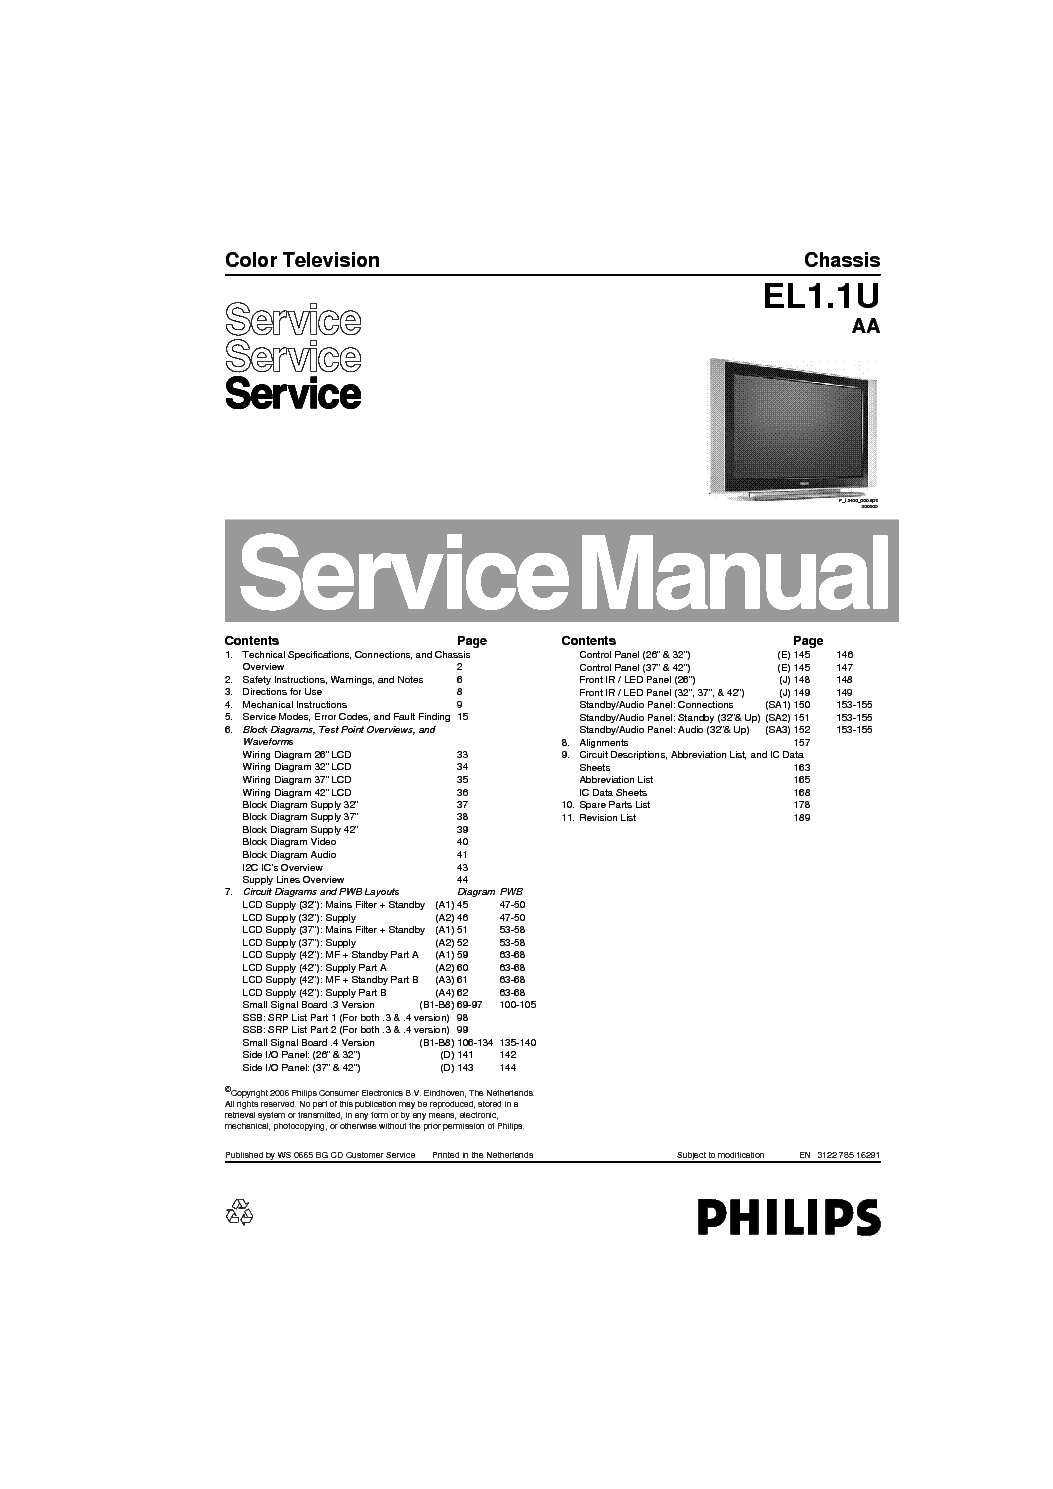 PHILIPS 26PF5321D CHASSIS EL1.U AA SM service manual (1st page)